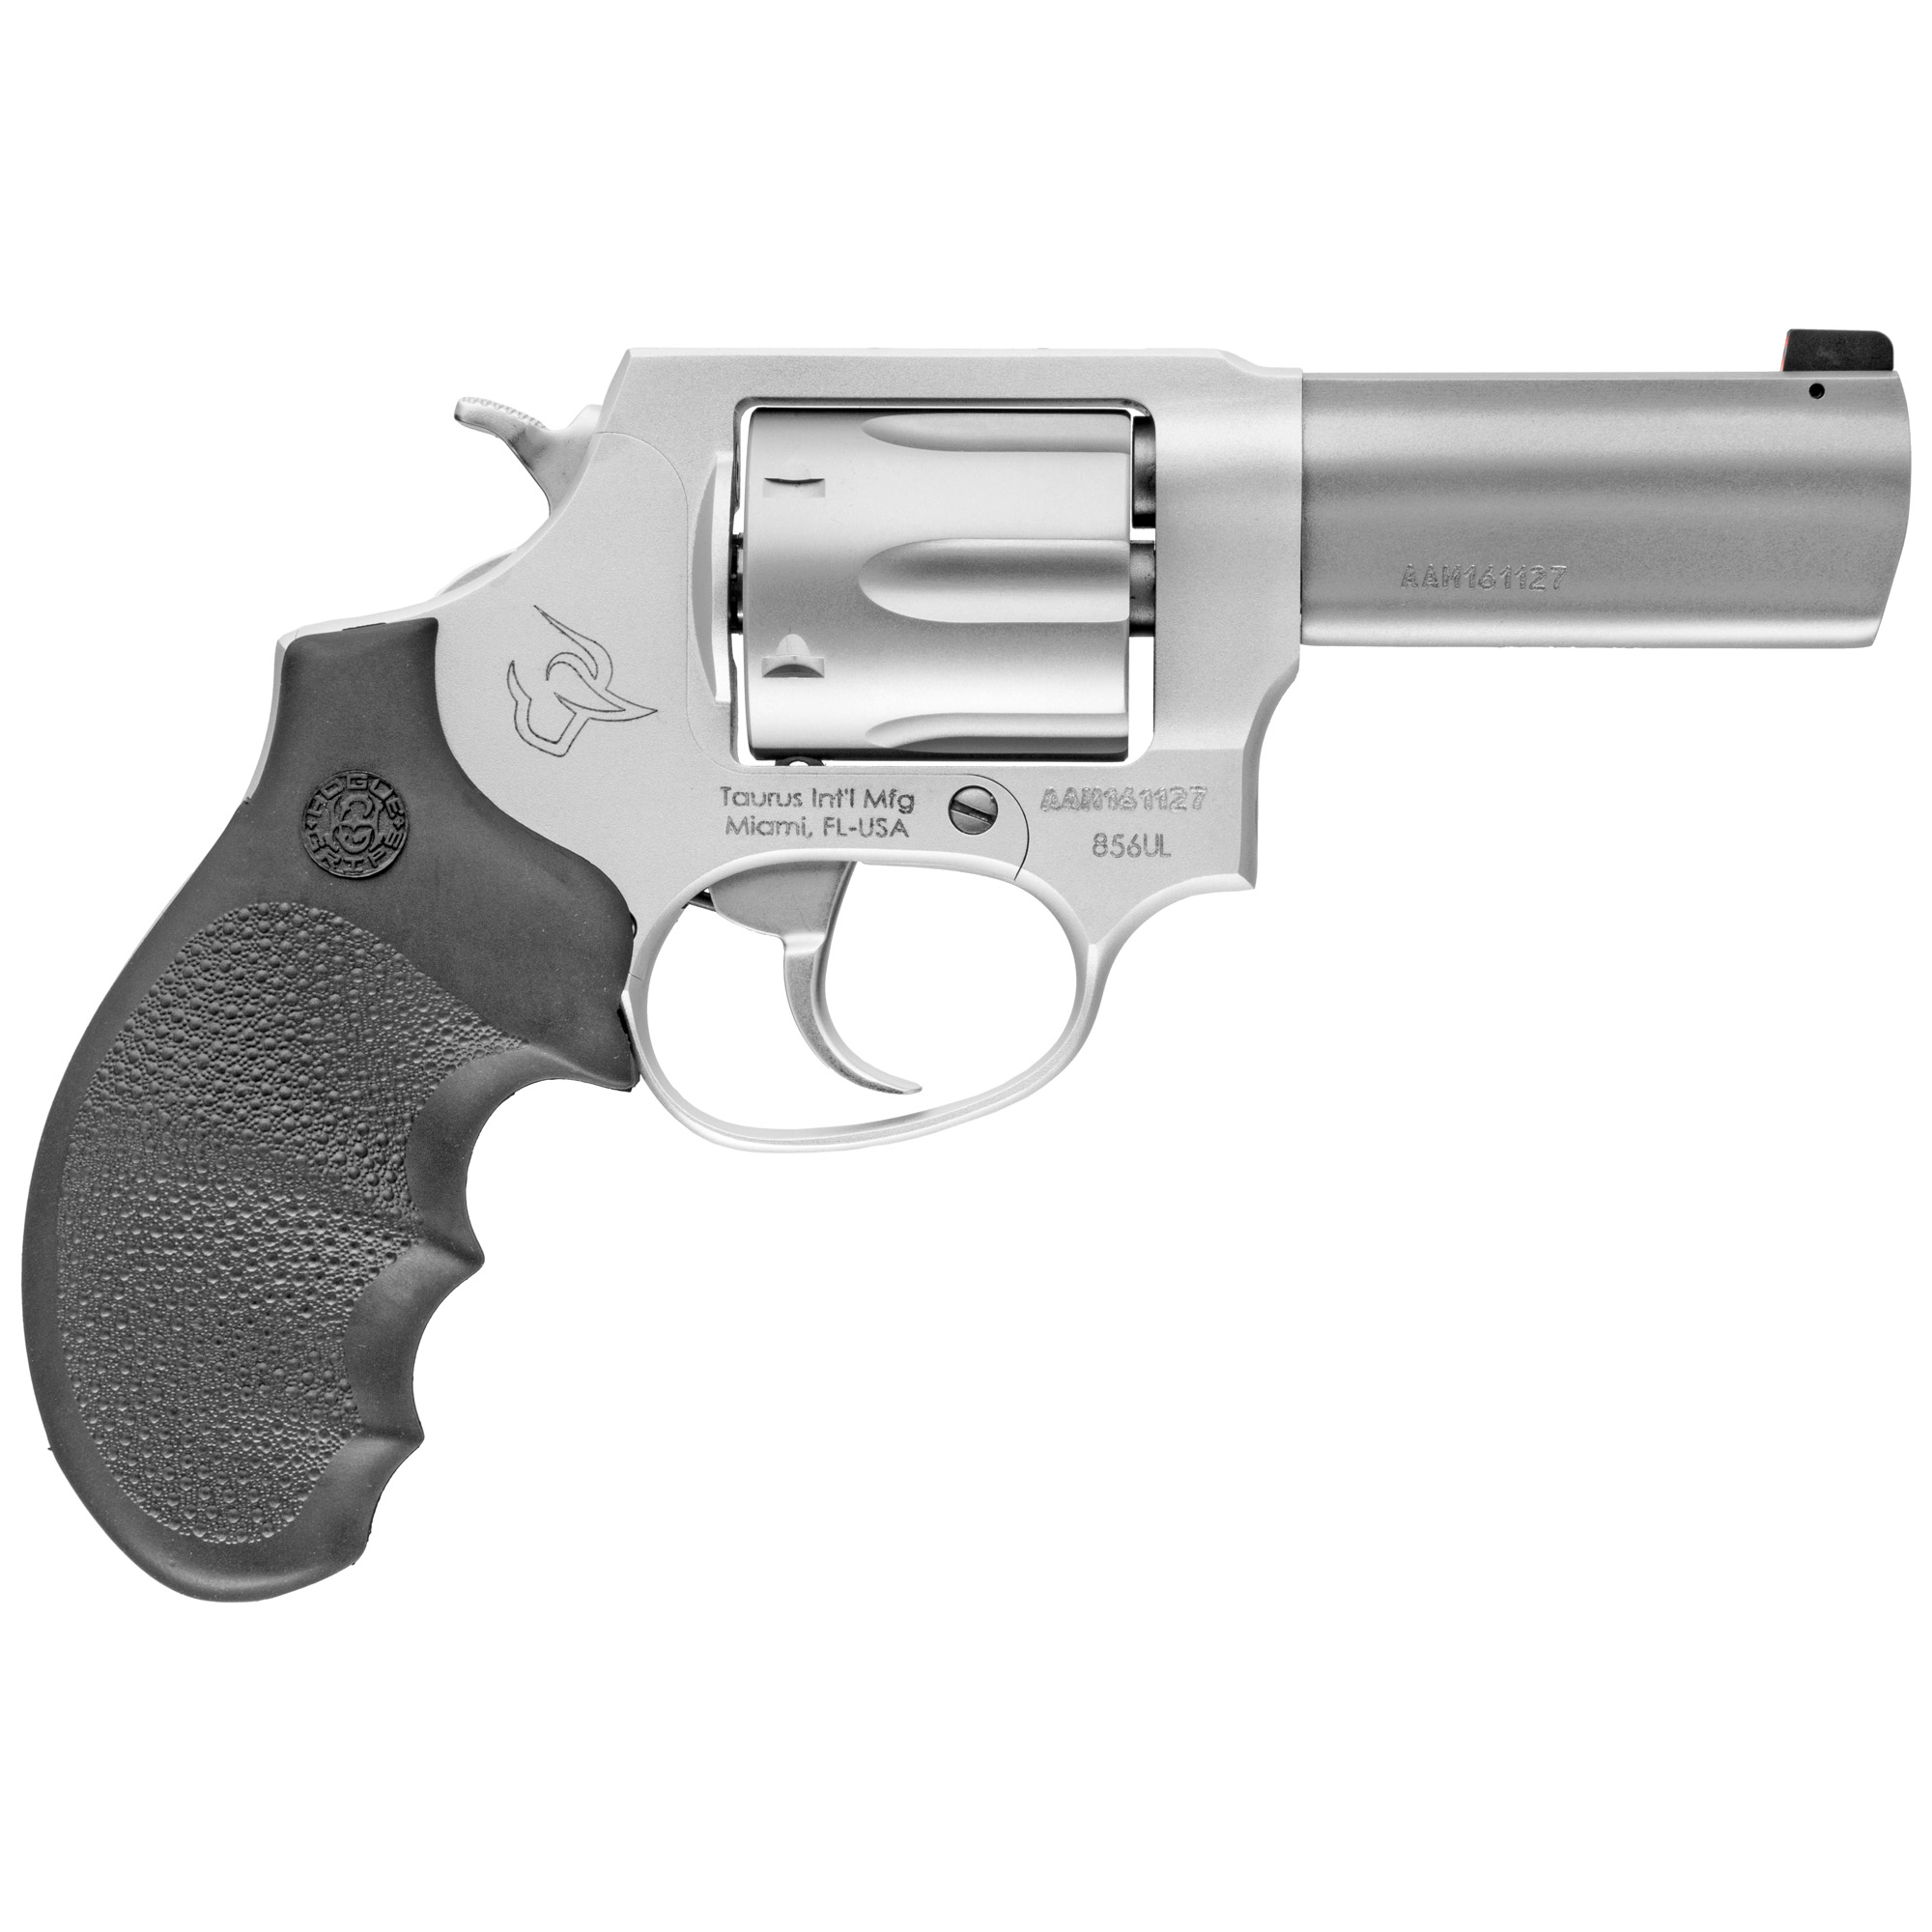 Taurus, Model 856, Double Action, Metal Frame Revolver, Medium Frame, 38 Special, 3" Barrel, Alloy, Matte Stainless Finish, Silver, Hogue Grip, 6 Rounds